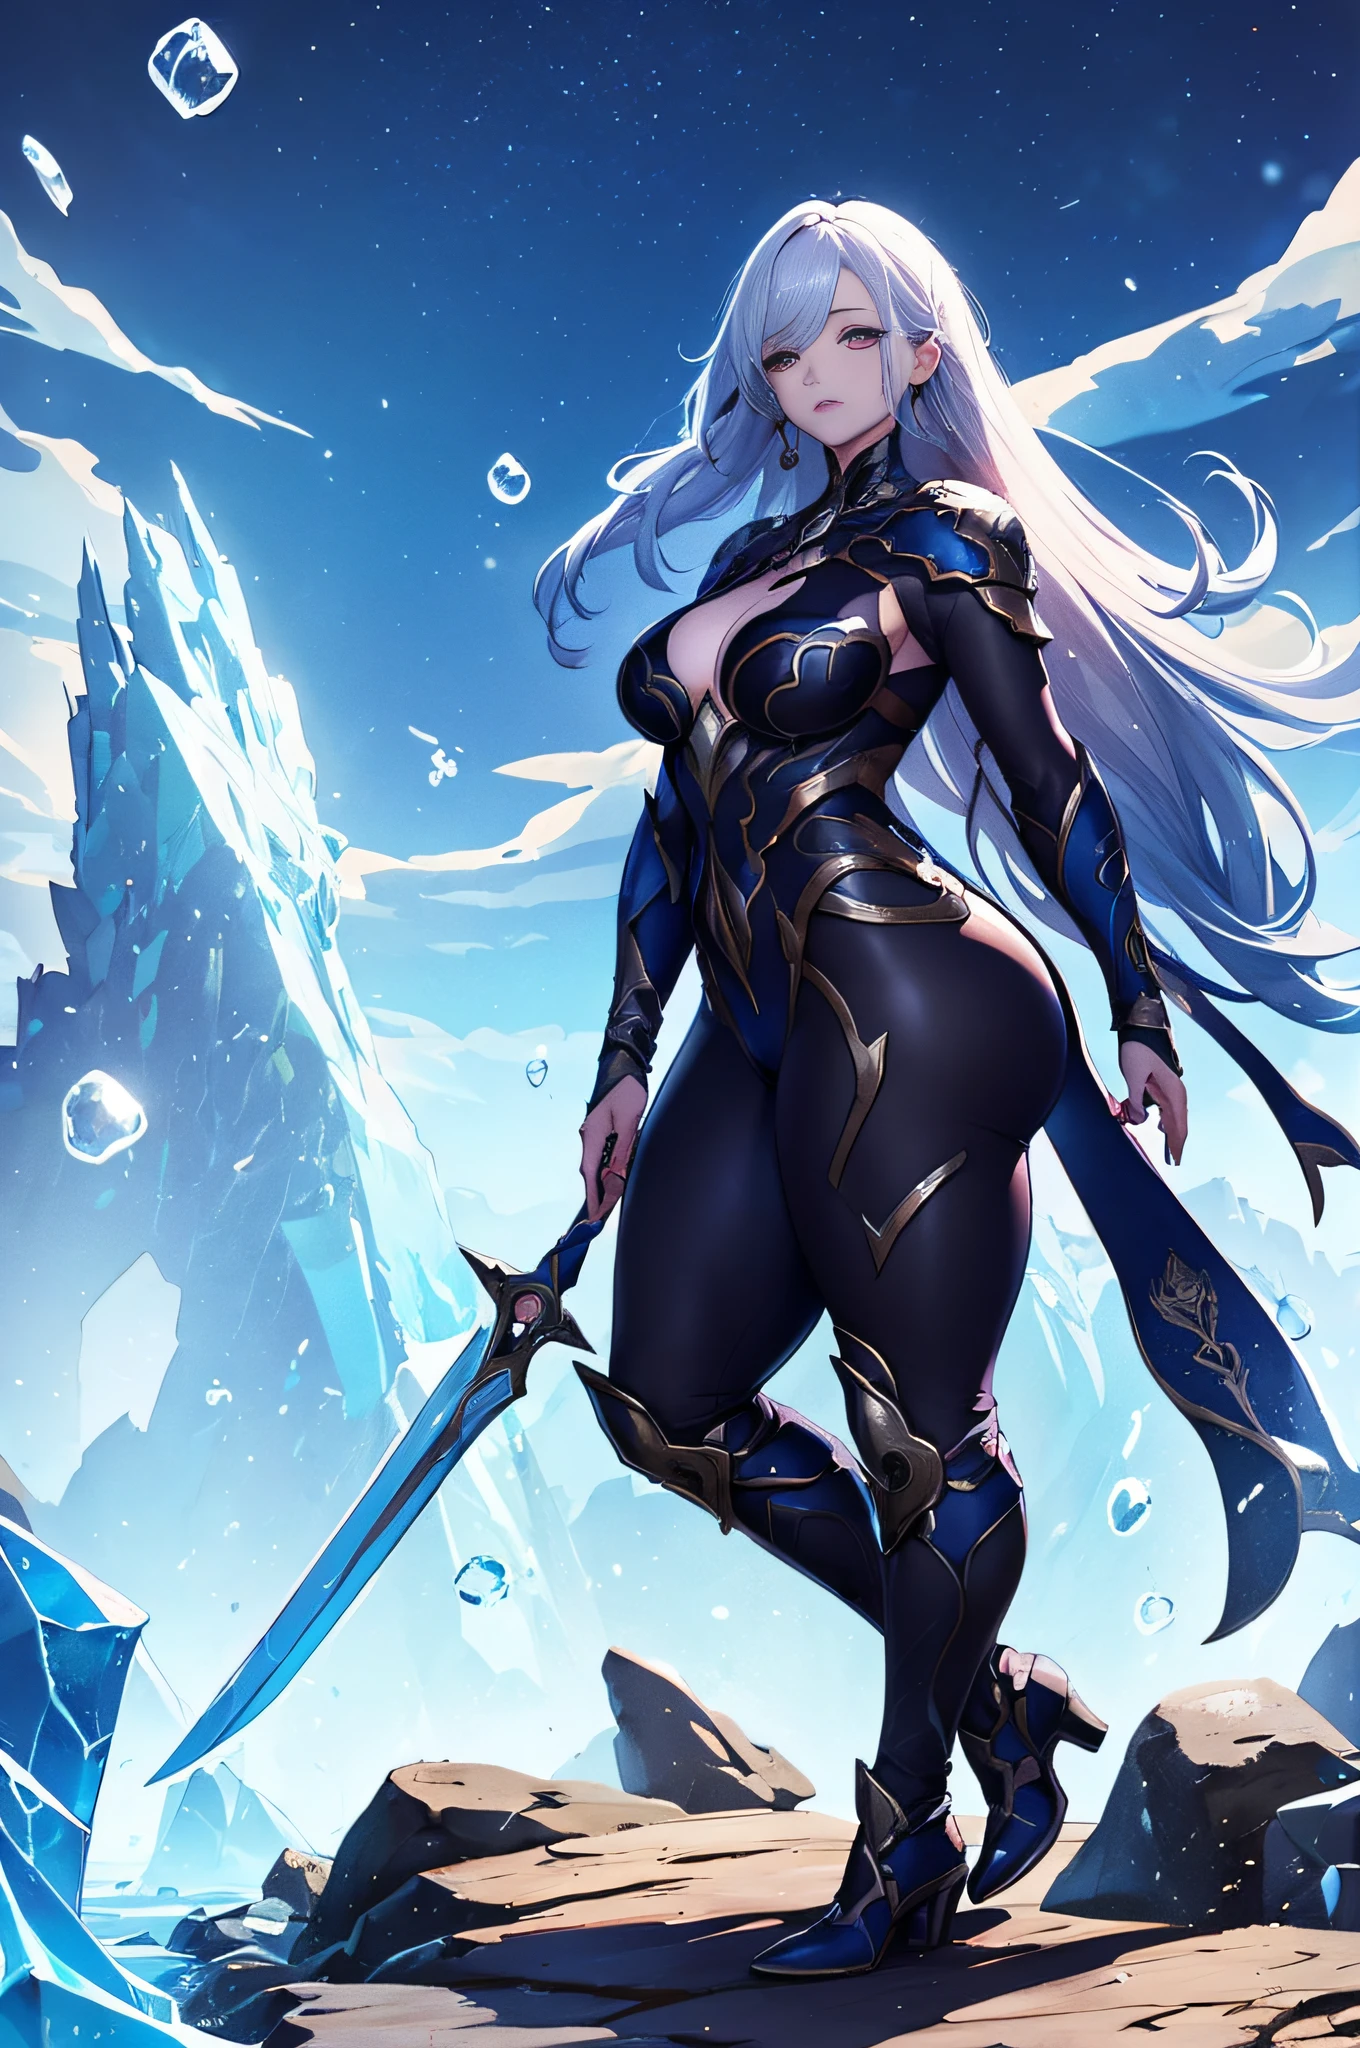 long whitr hair,blue colors,big chest,a beauty girl,pupils,Seductive laughter, standing solo, alone,hand on leg,eventide, big ass, thick thighs, white armor, wearing detailed combat body suit, blue armor, ice sword, strong legs, voluptuous legs, has sword in hand,small waist, highly voluptuous thighs, bubble ass type, fiery cape, ice floating blades,